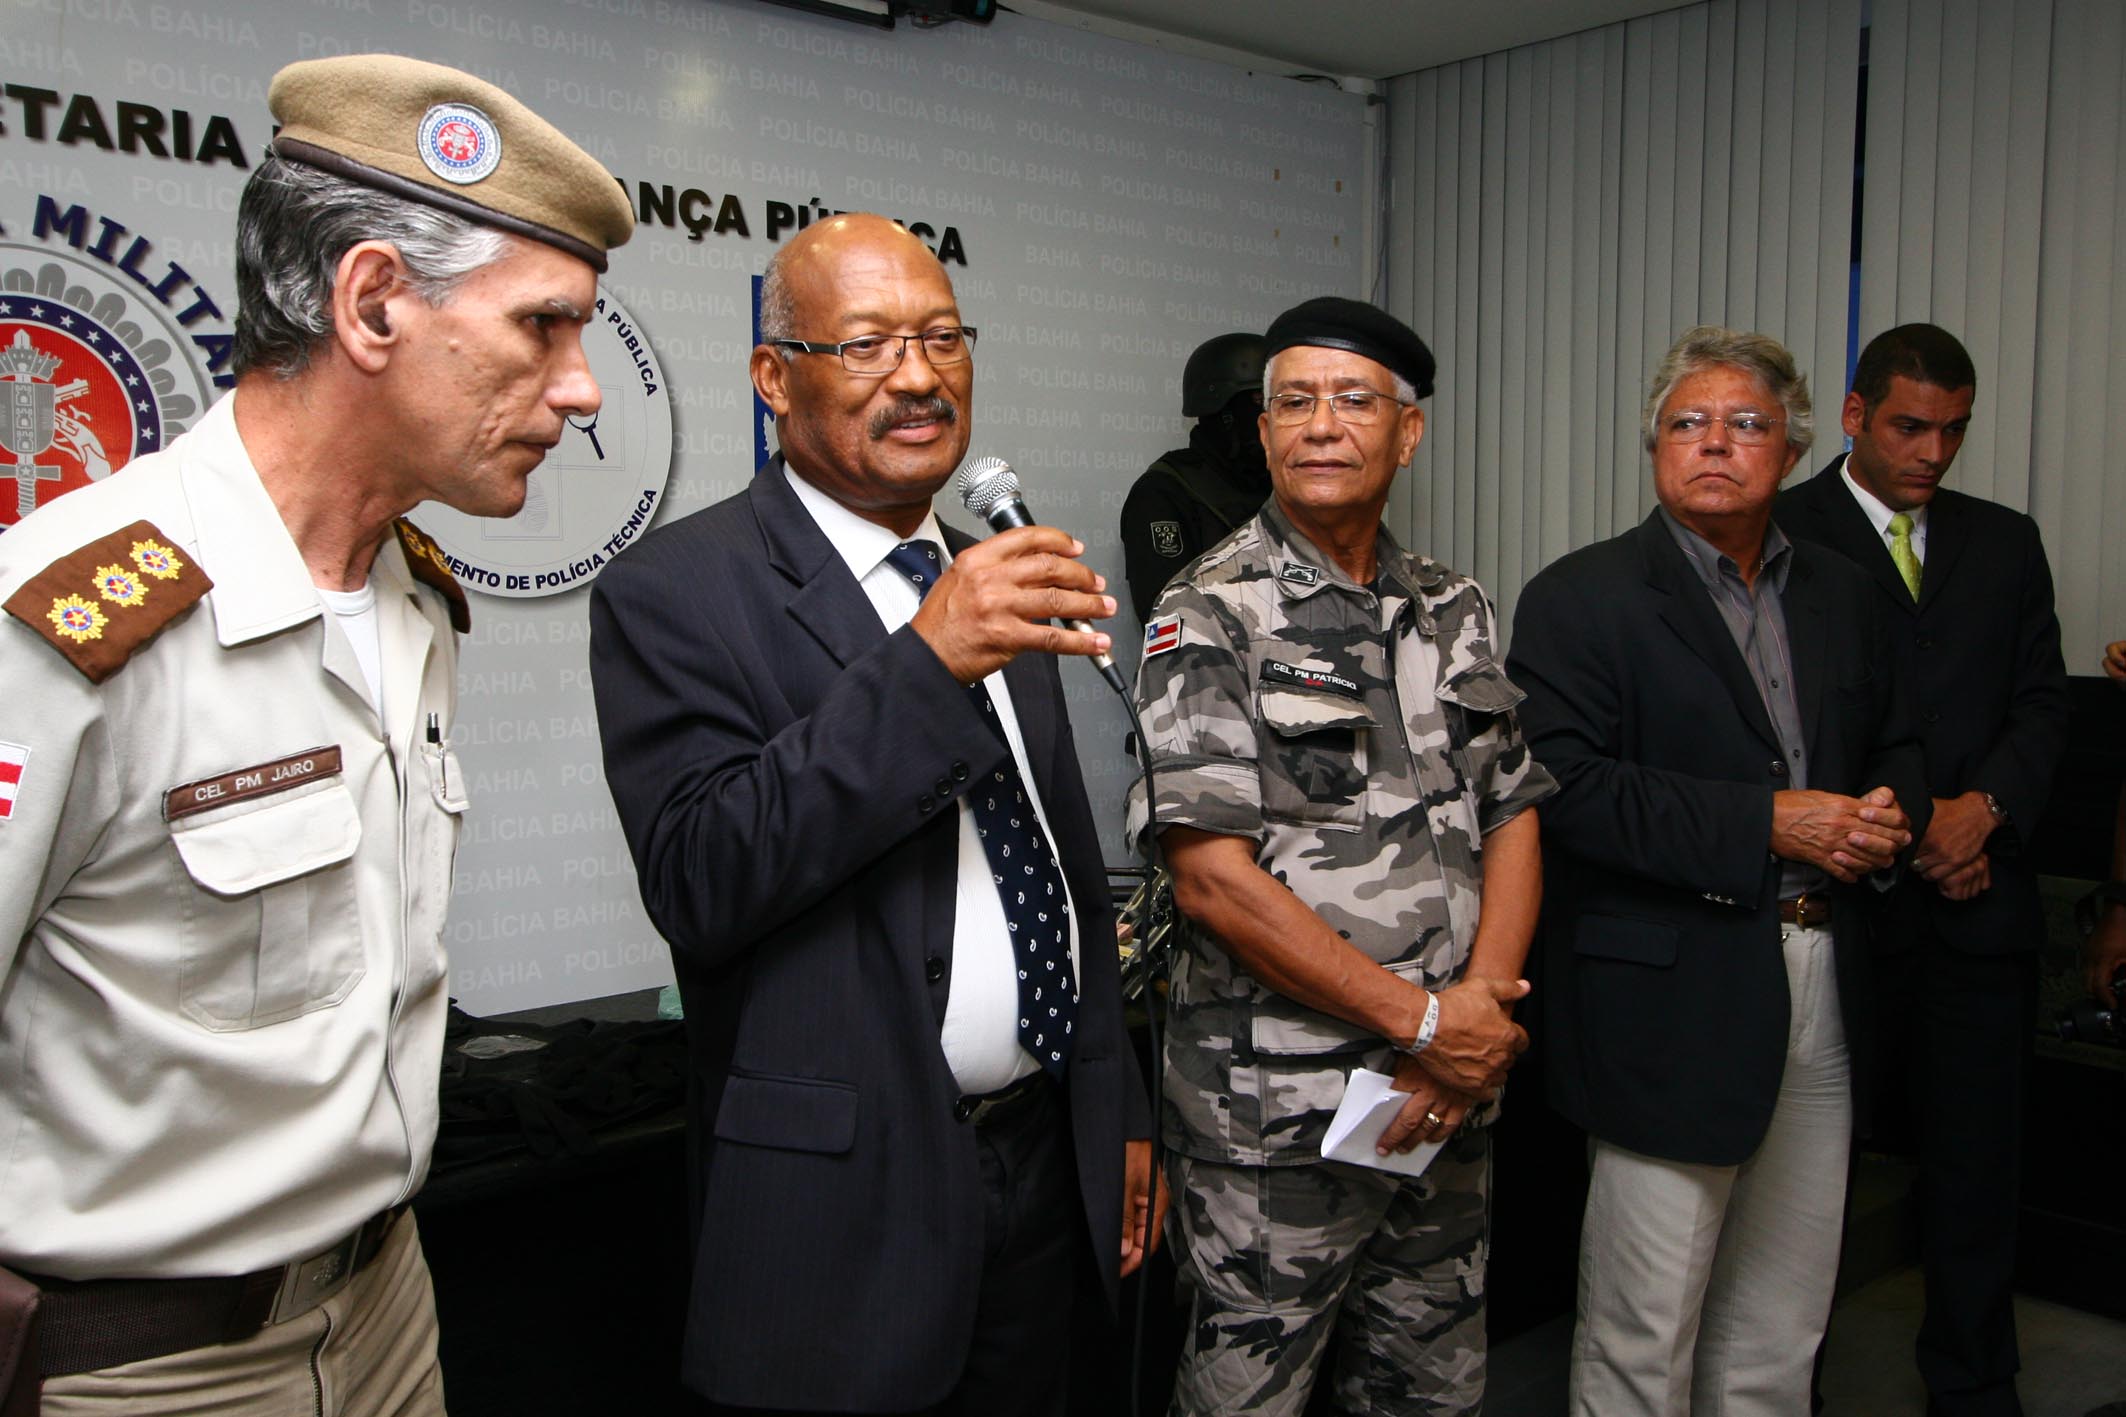 a group of people in military uniform stand together